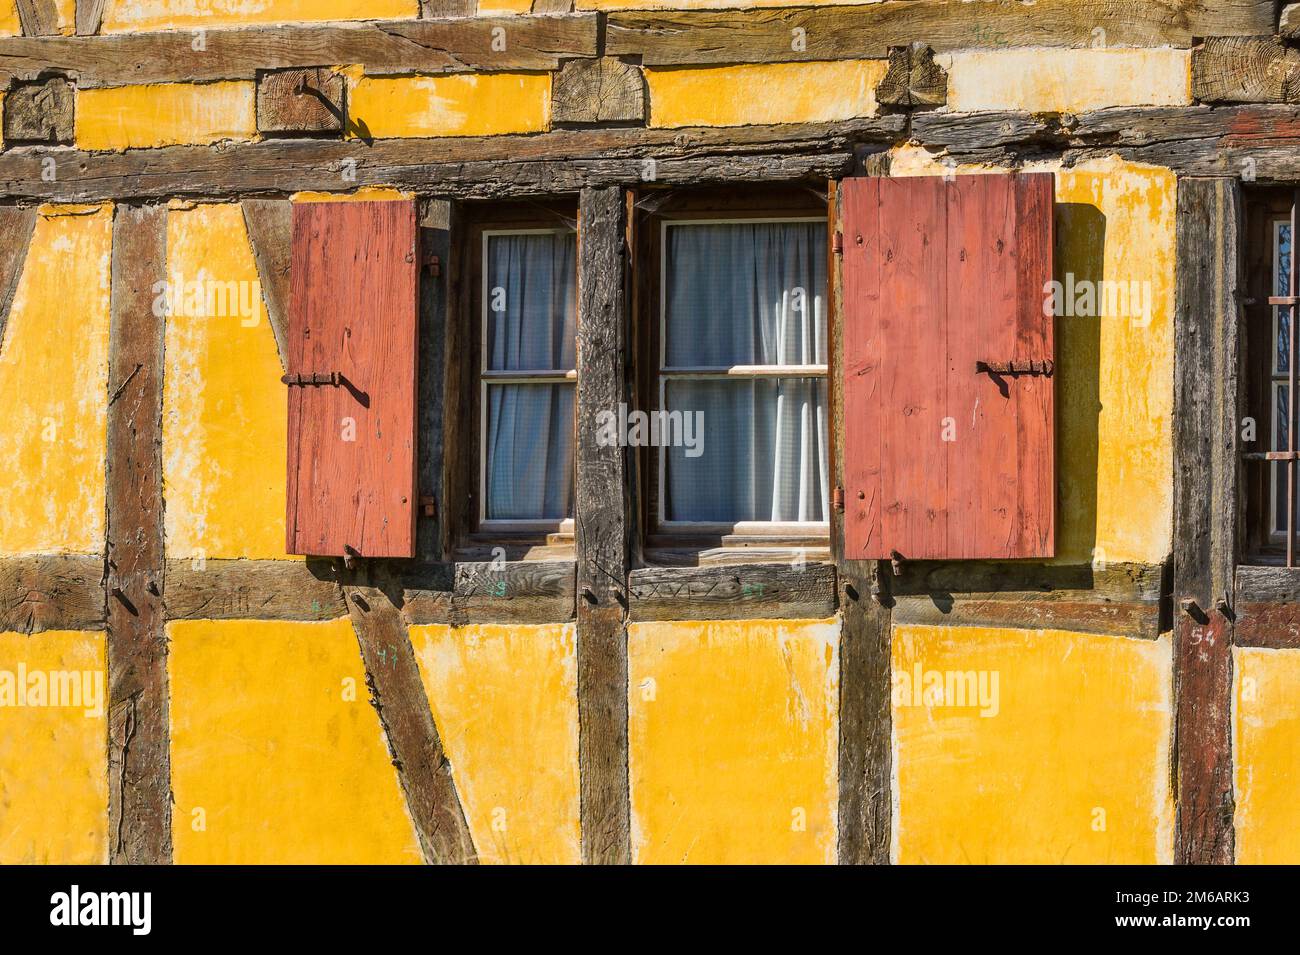 Yellow half-timbered house with wooden shutters Stock Photo